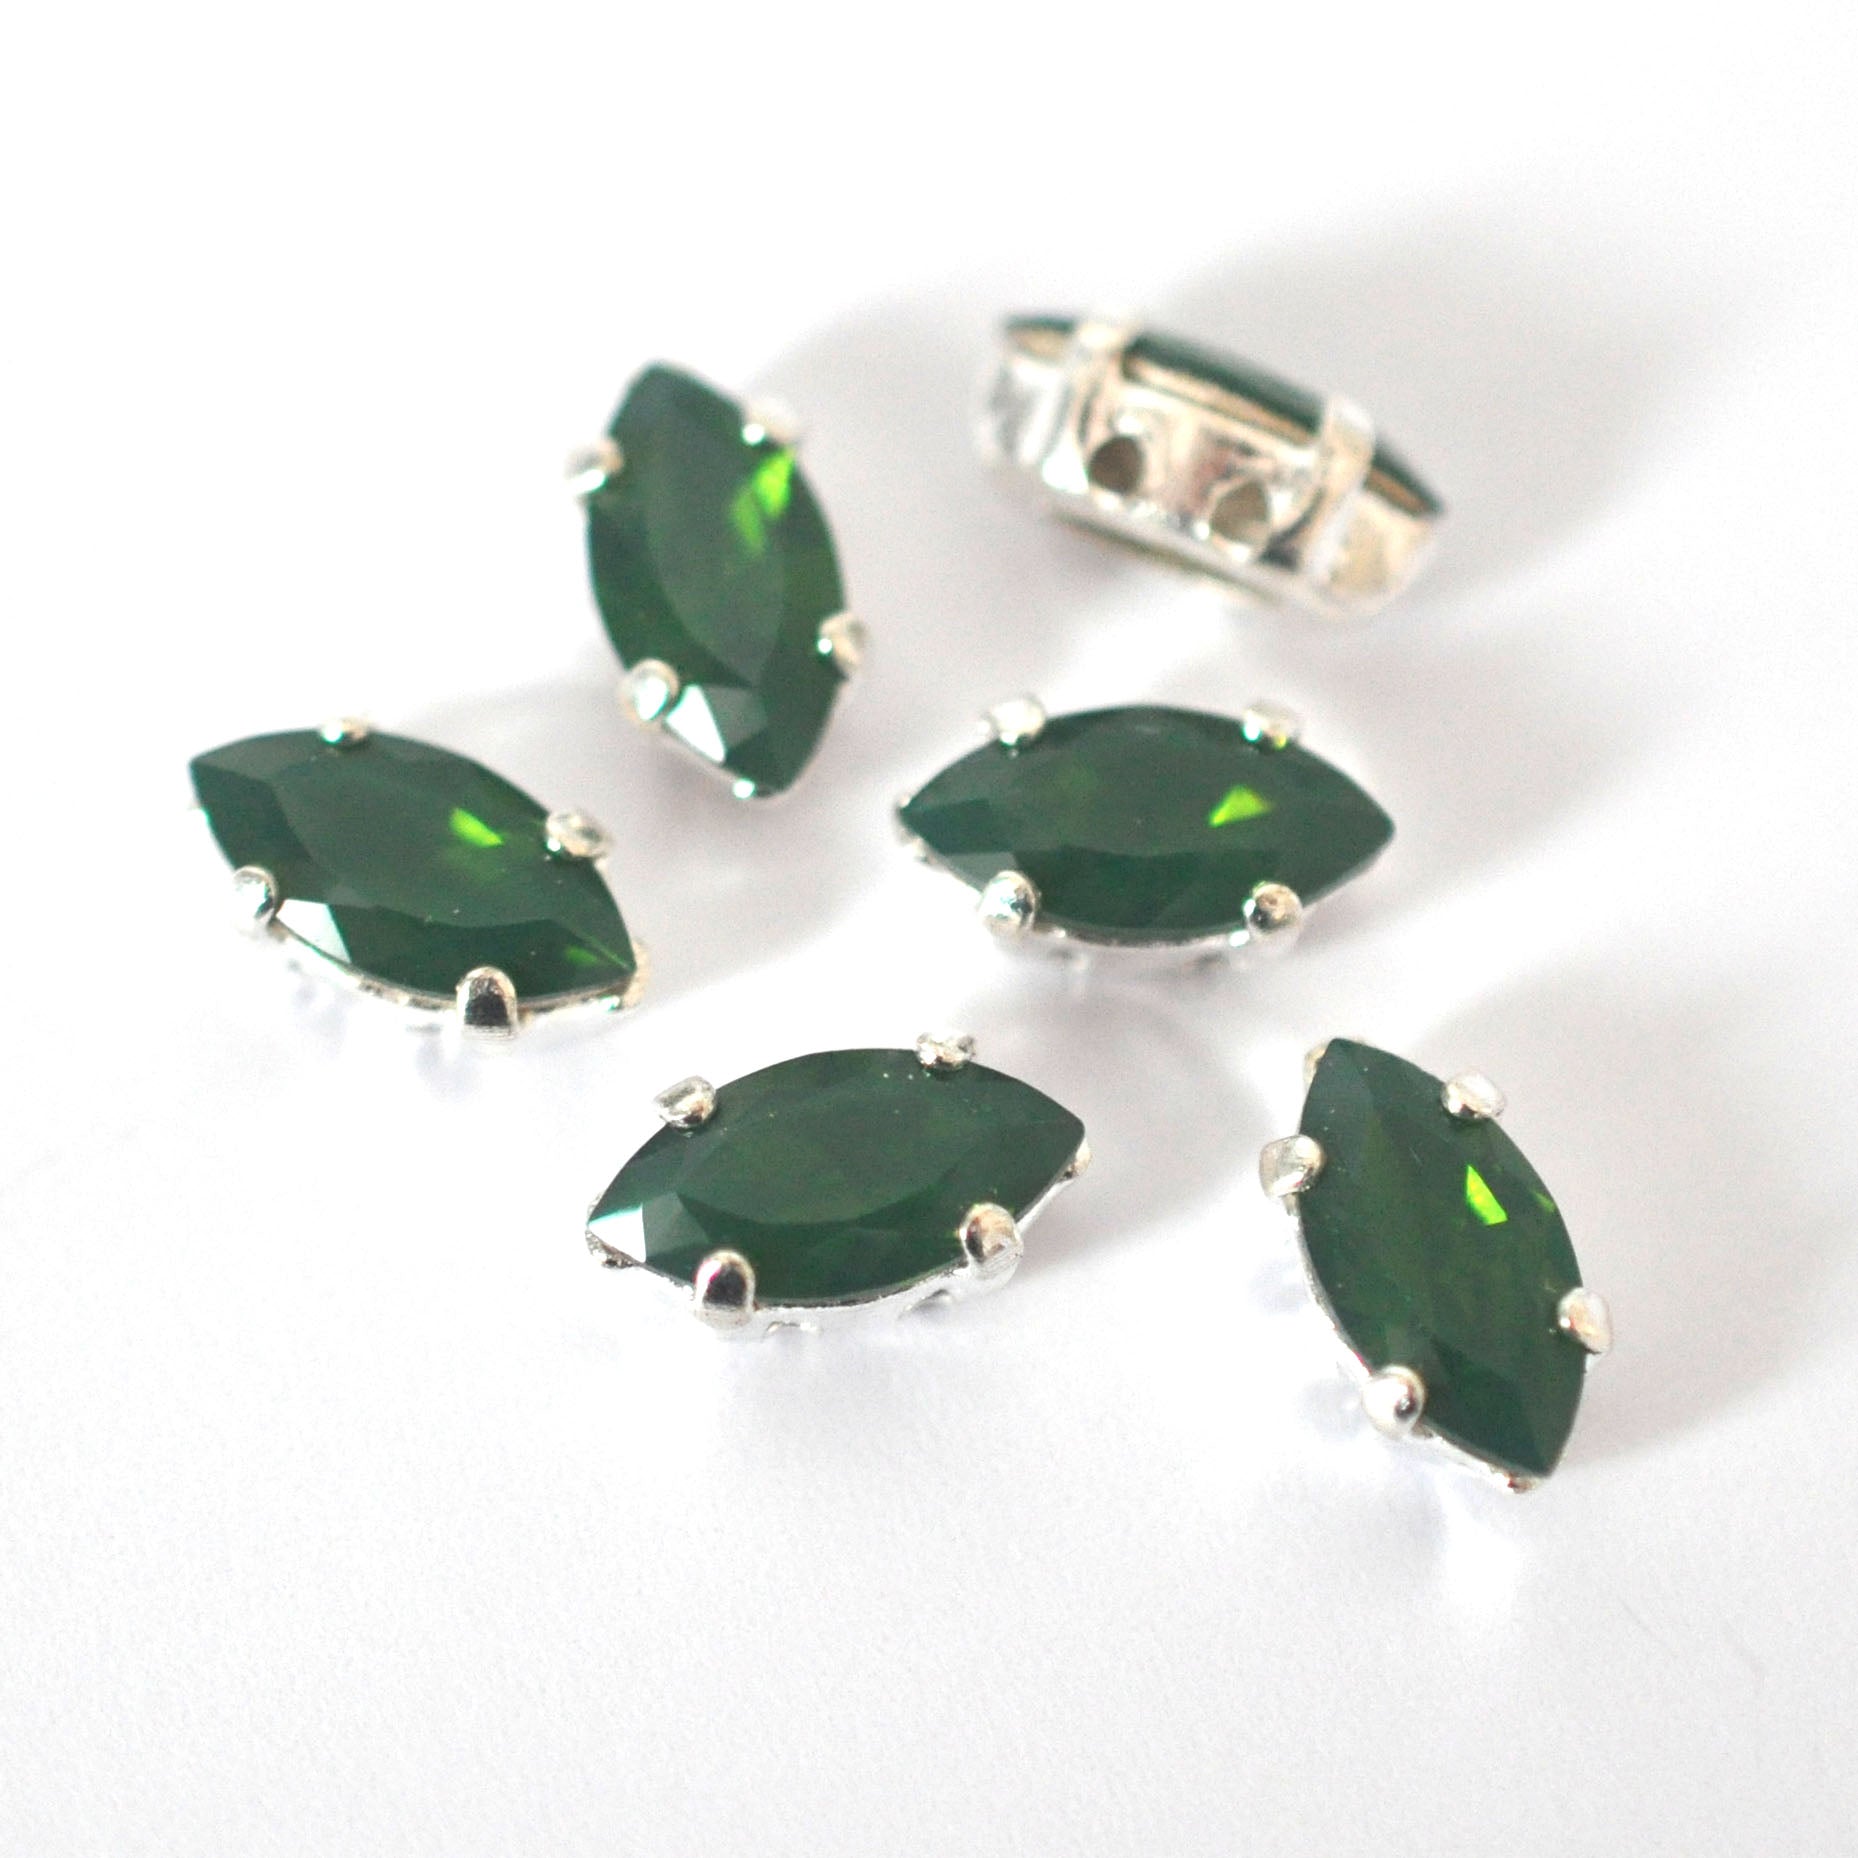 Palace Green Opal 10x5mm Navette Sew On Crystals - 6 Pieces